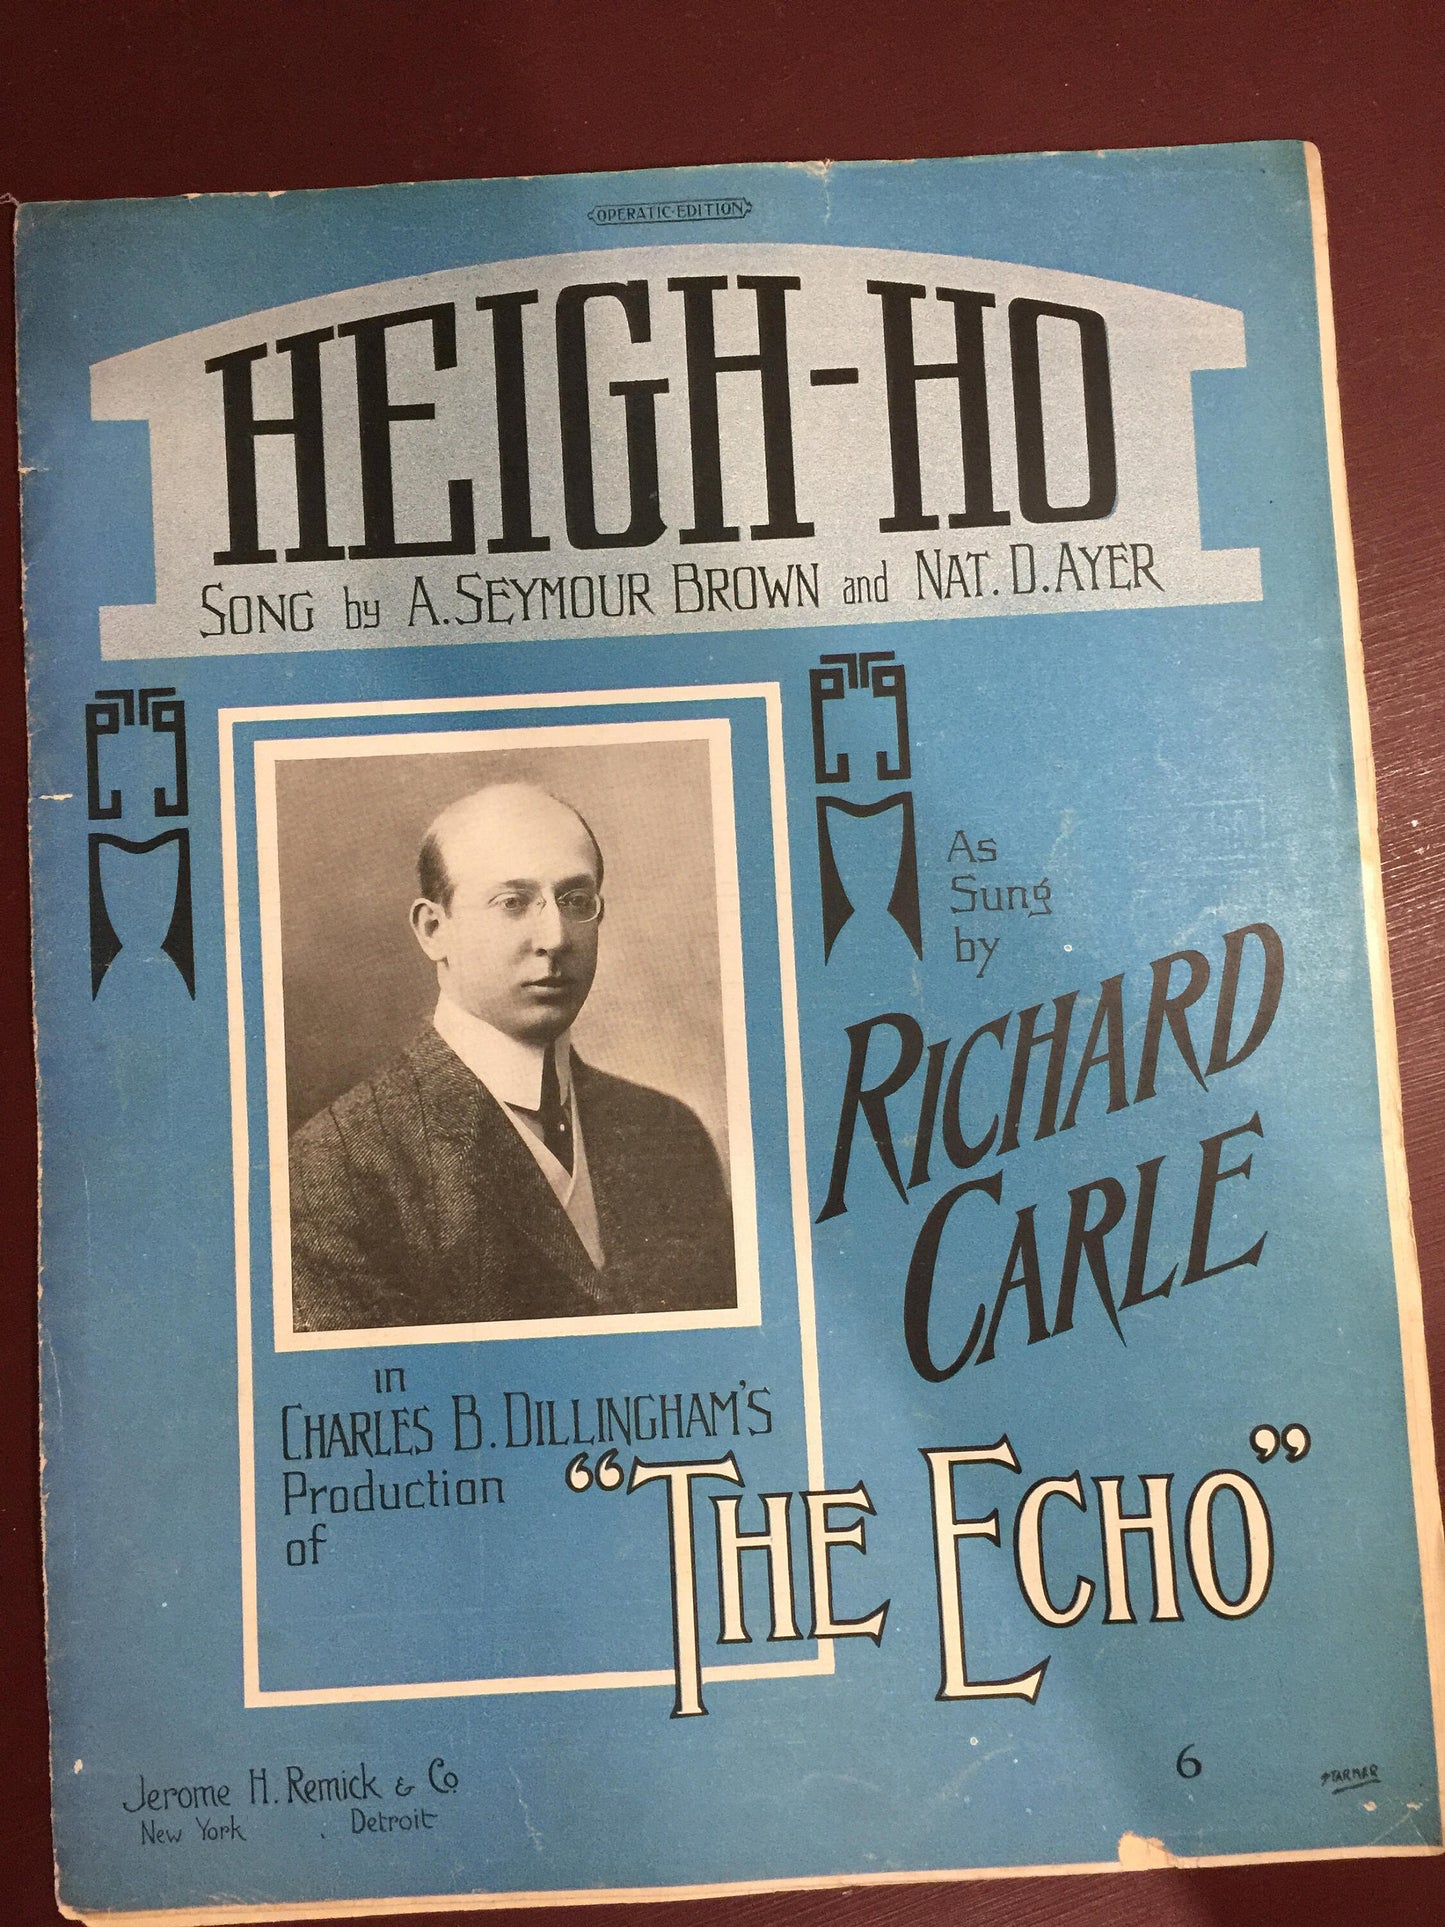 Heigh-Ho, Vintage 1910, Song by A. Seymour Brown and Nat. D. Ayer Music by Charles B. Dillingham's "The echo"